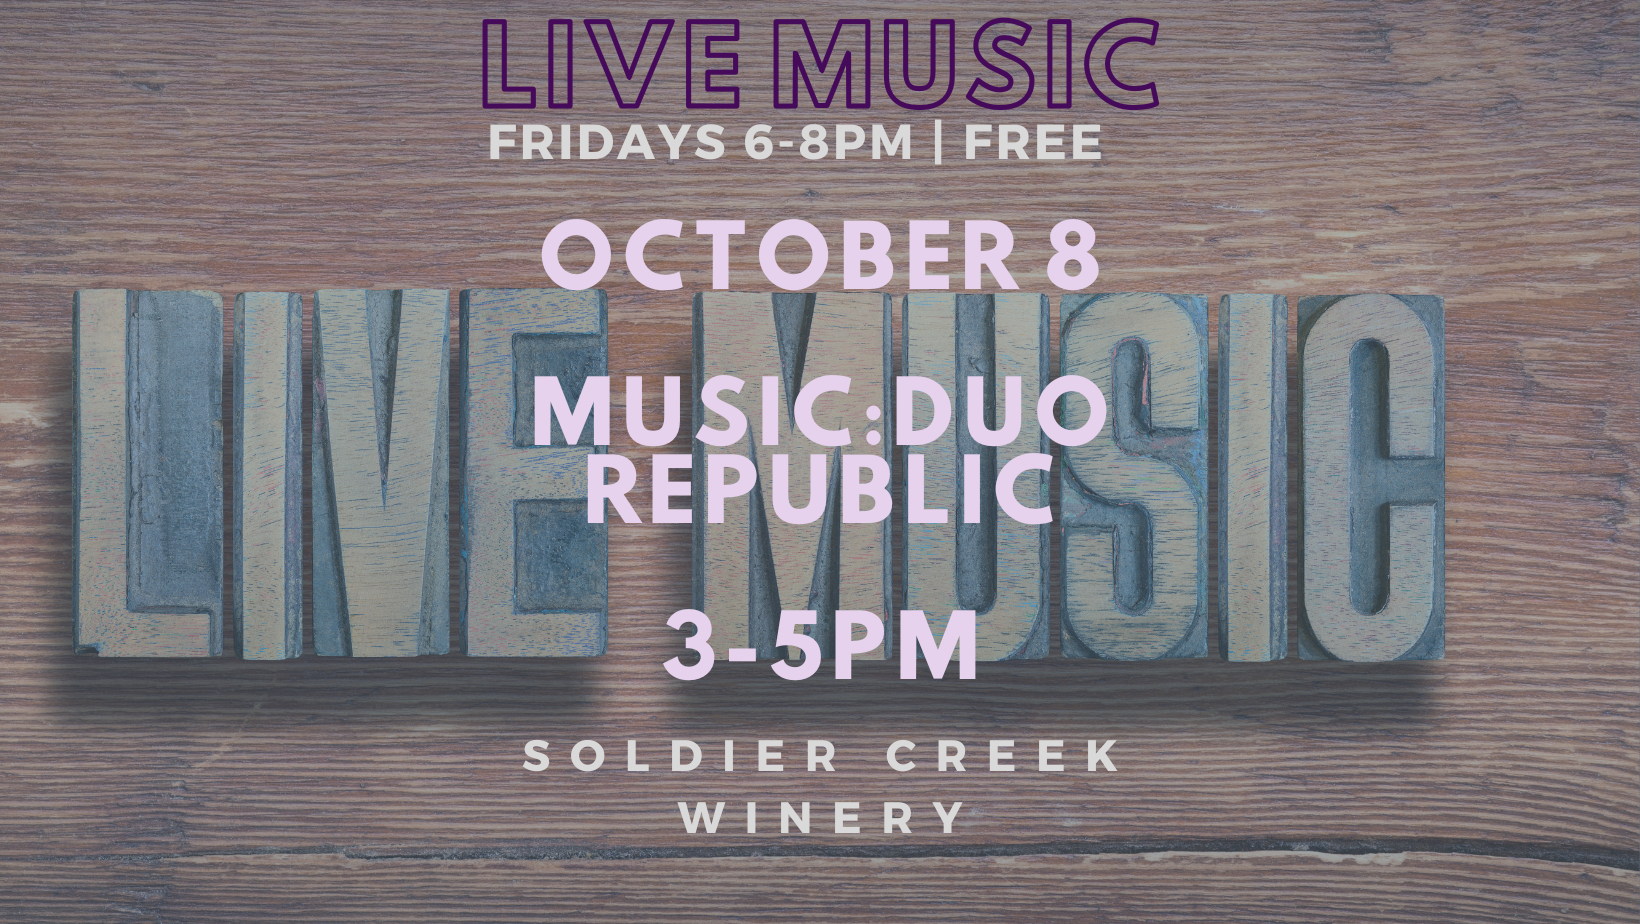 live music at soldier creek winery on select sundays, october 8 is duo republic from 3-5pm. free to listen!